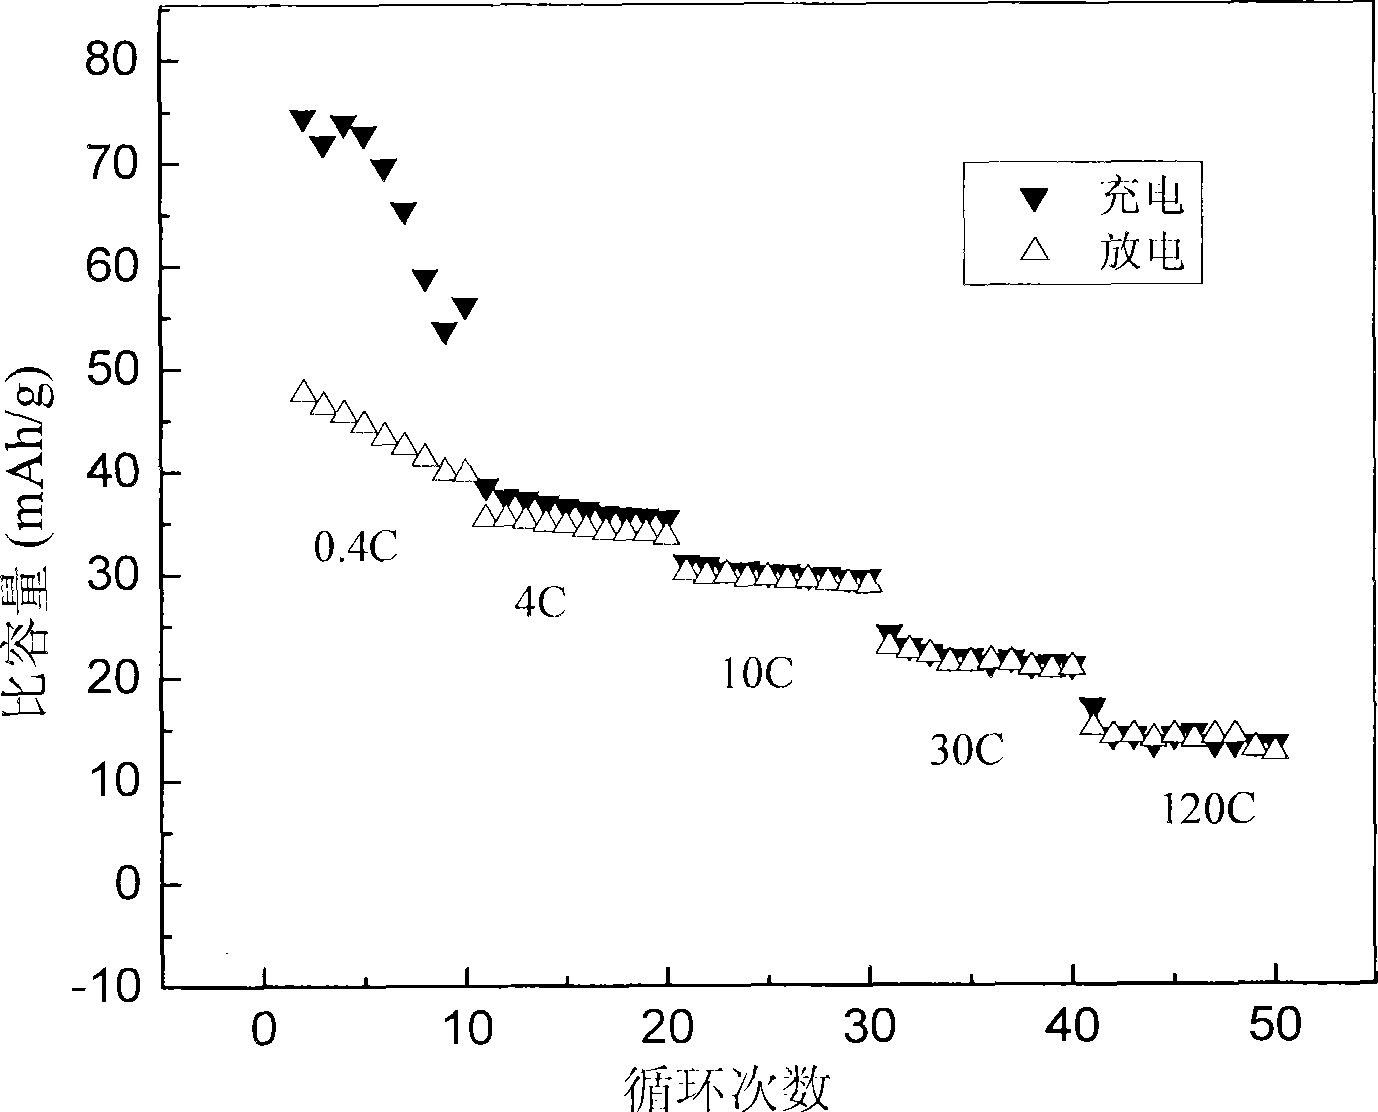 Asymmetric lithium iron phosphate cell using lithium titanate as main active substance of negative pole